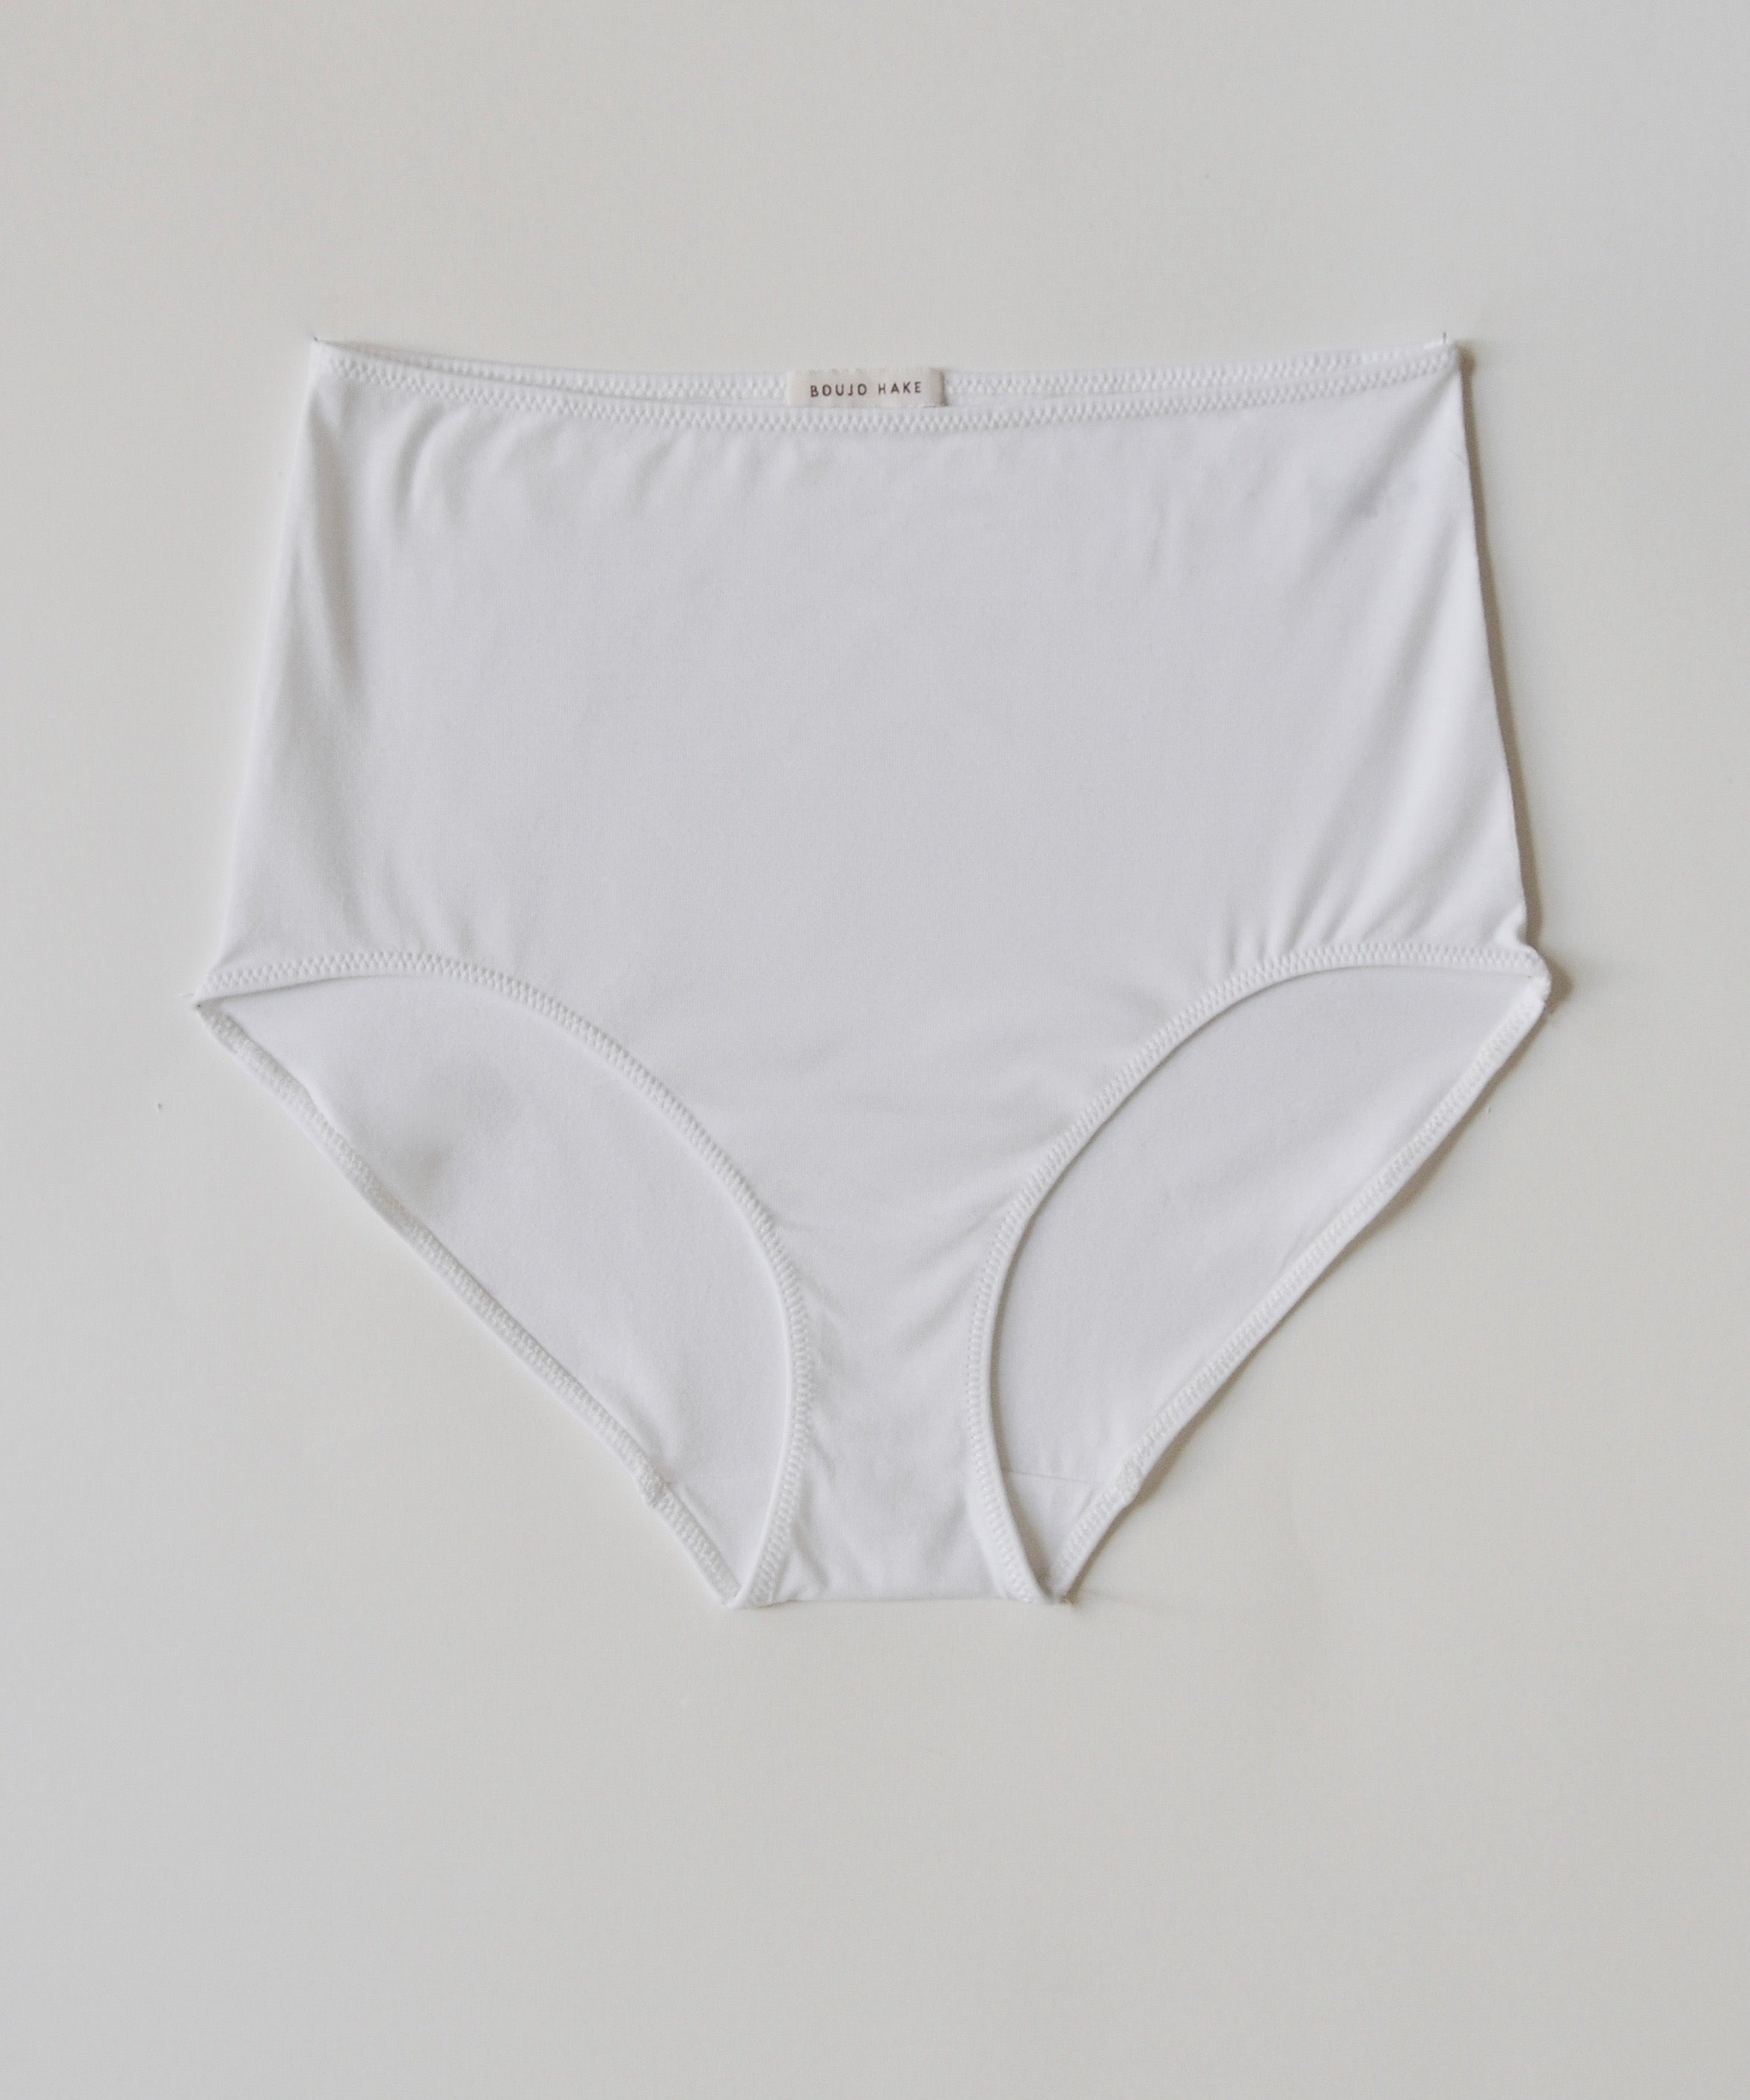 boujo-hake-high-briefs-big-knickers-granny-pants-organic-cotton-made-in-the-uk